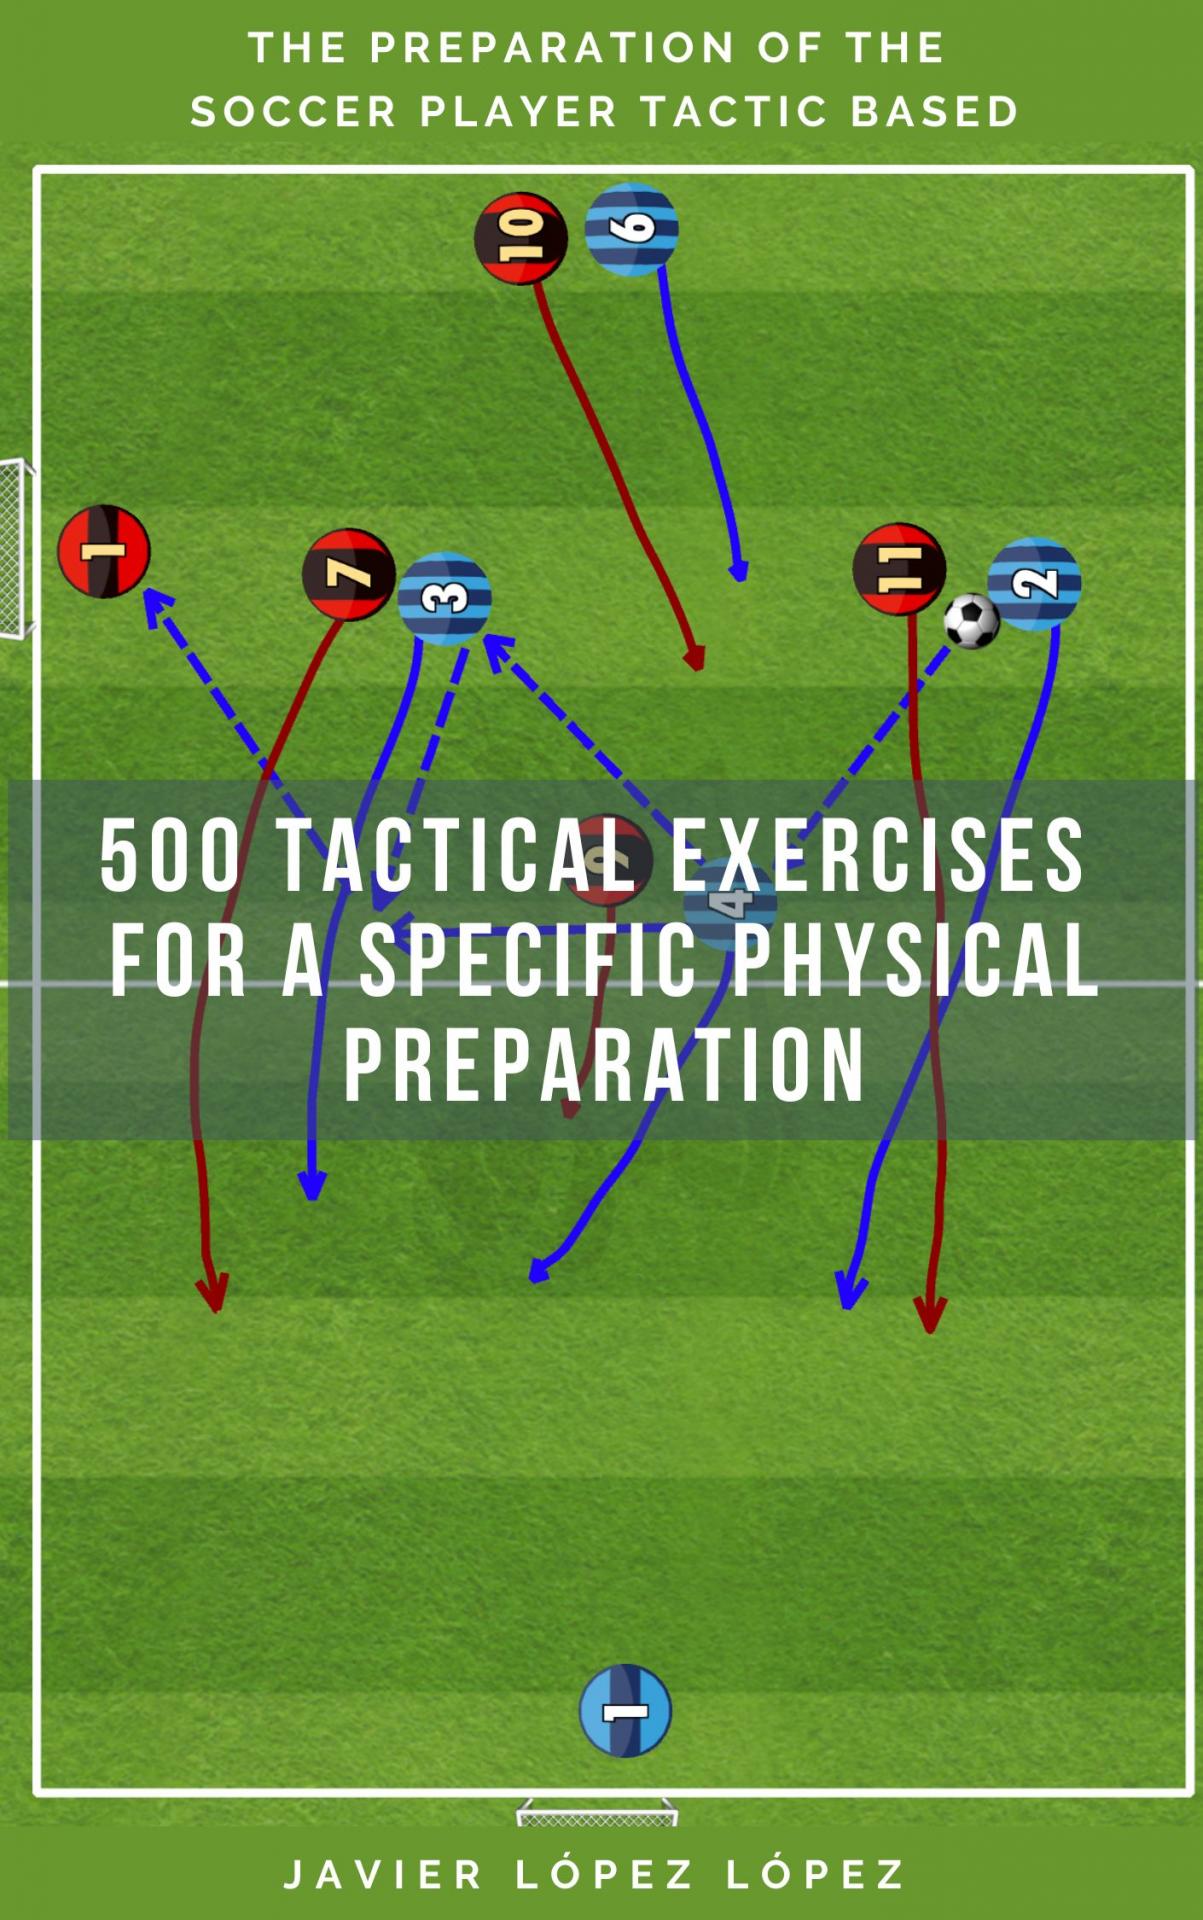 500 tactical exercises for a specific physical preparation